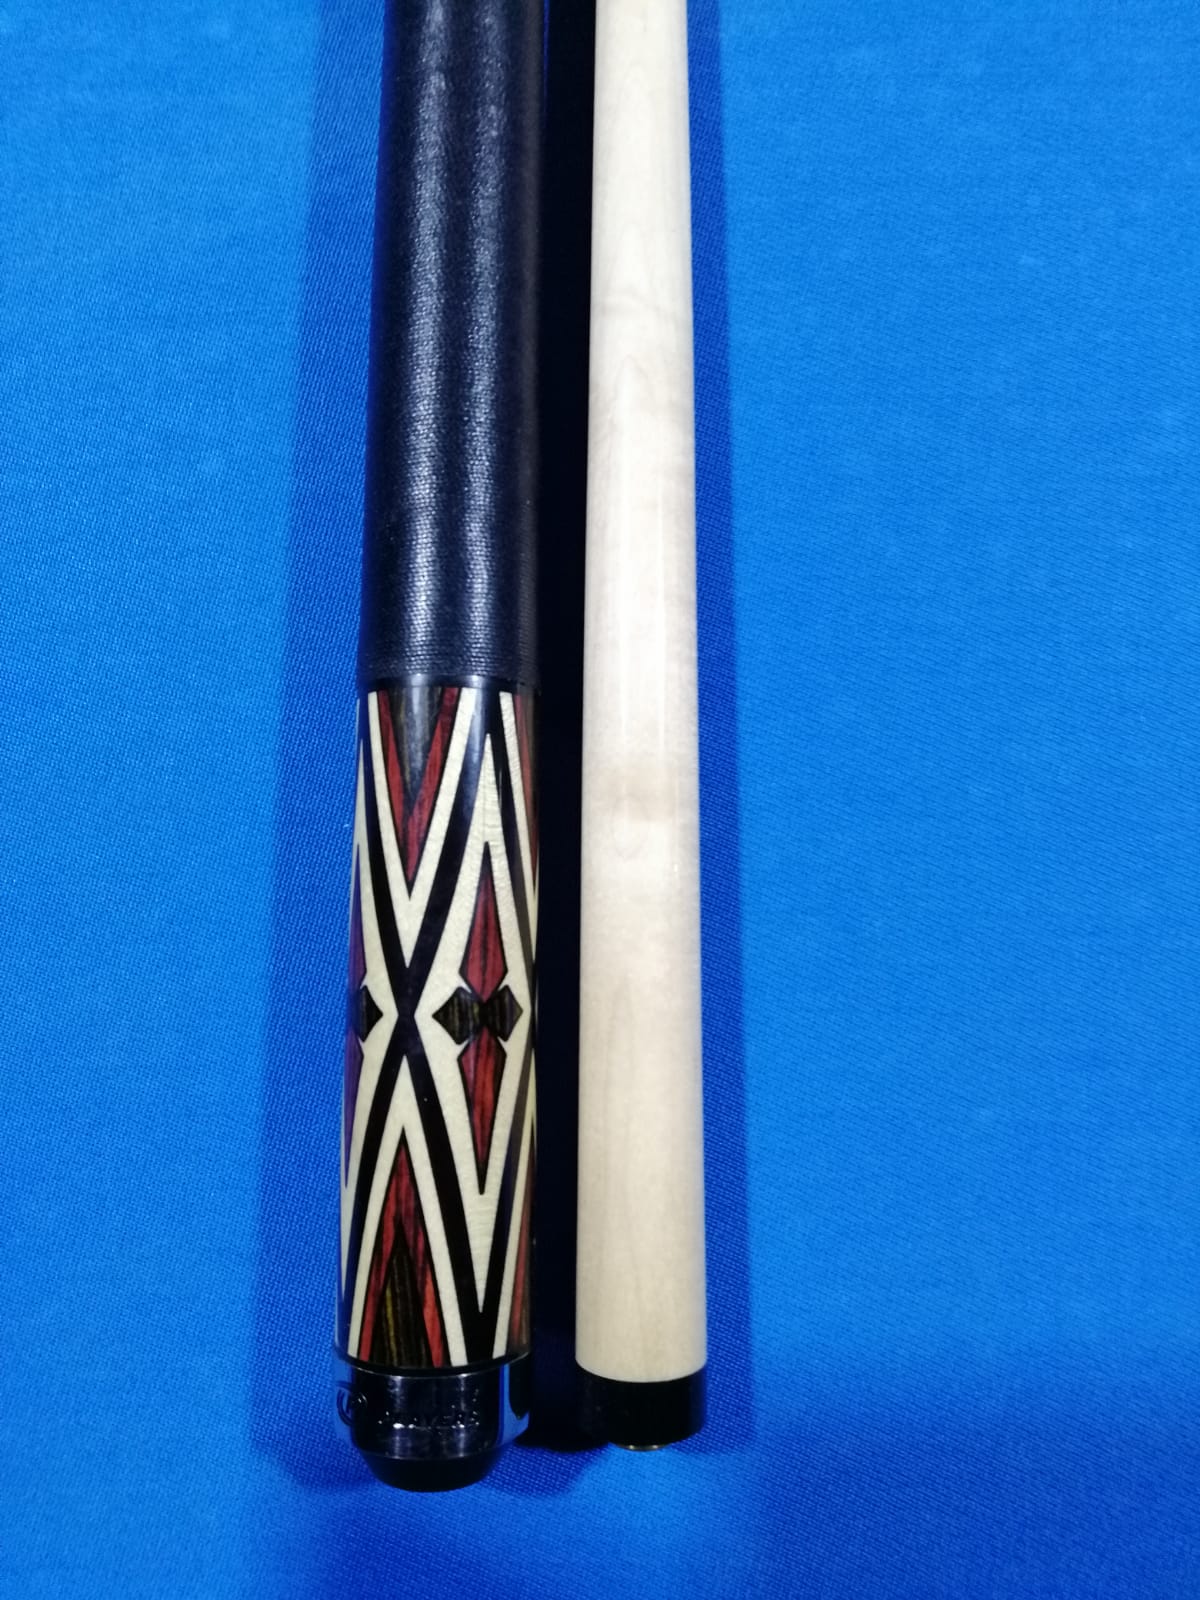 PLAYERS Cues G-3396